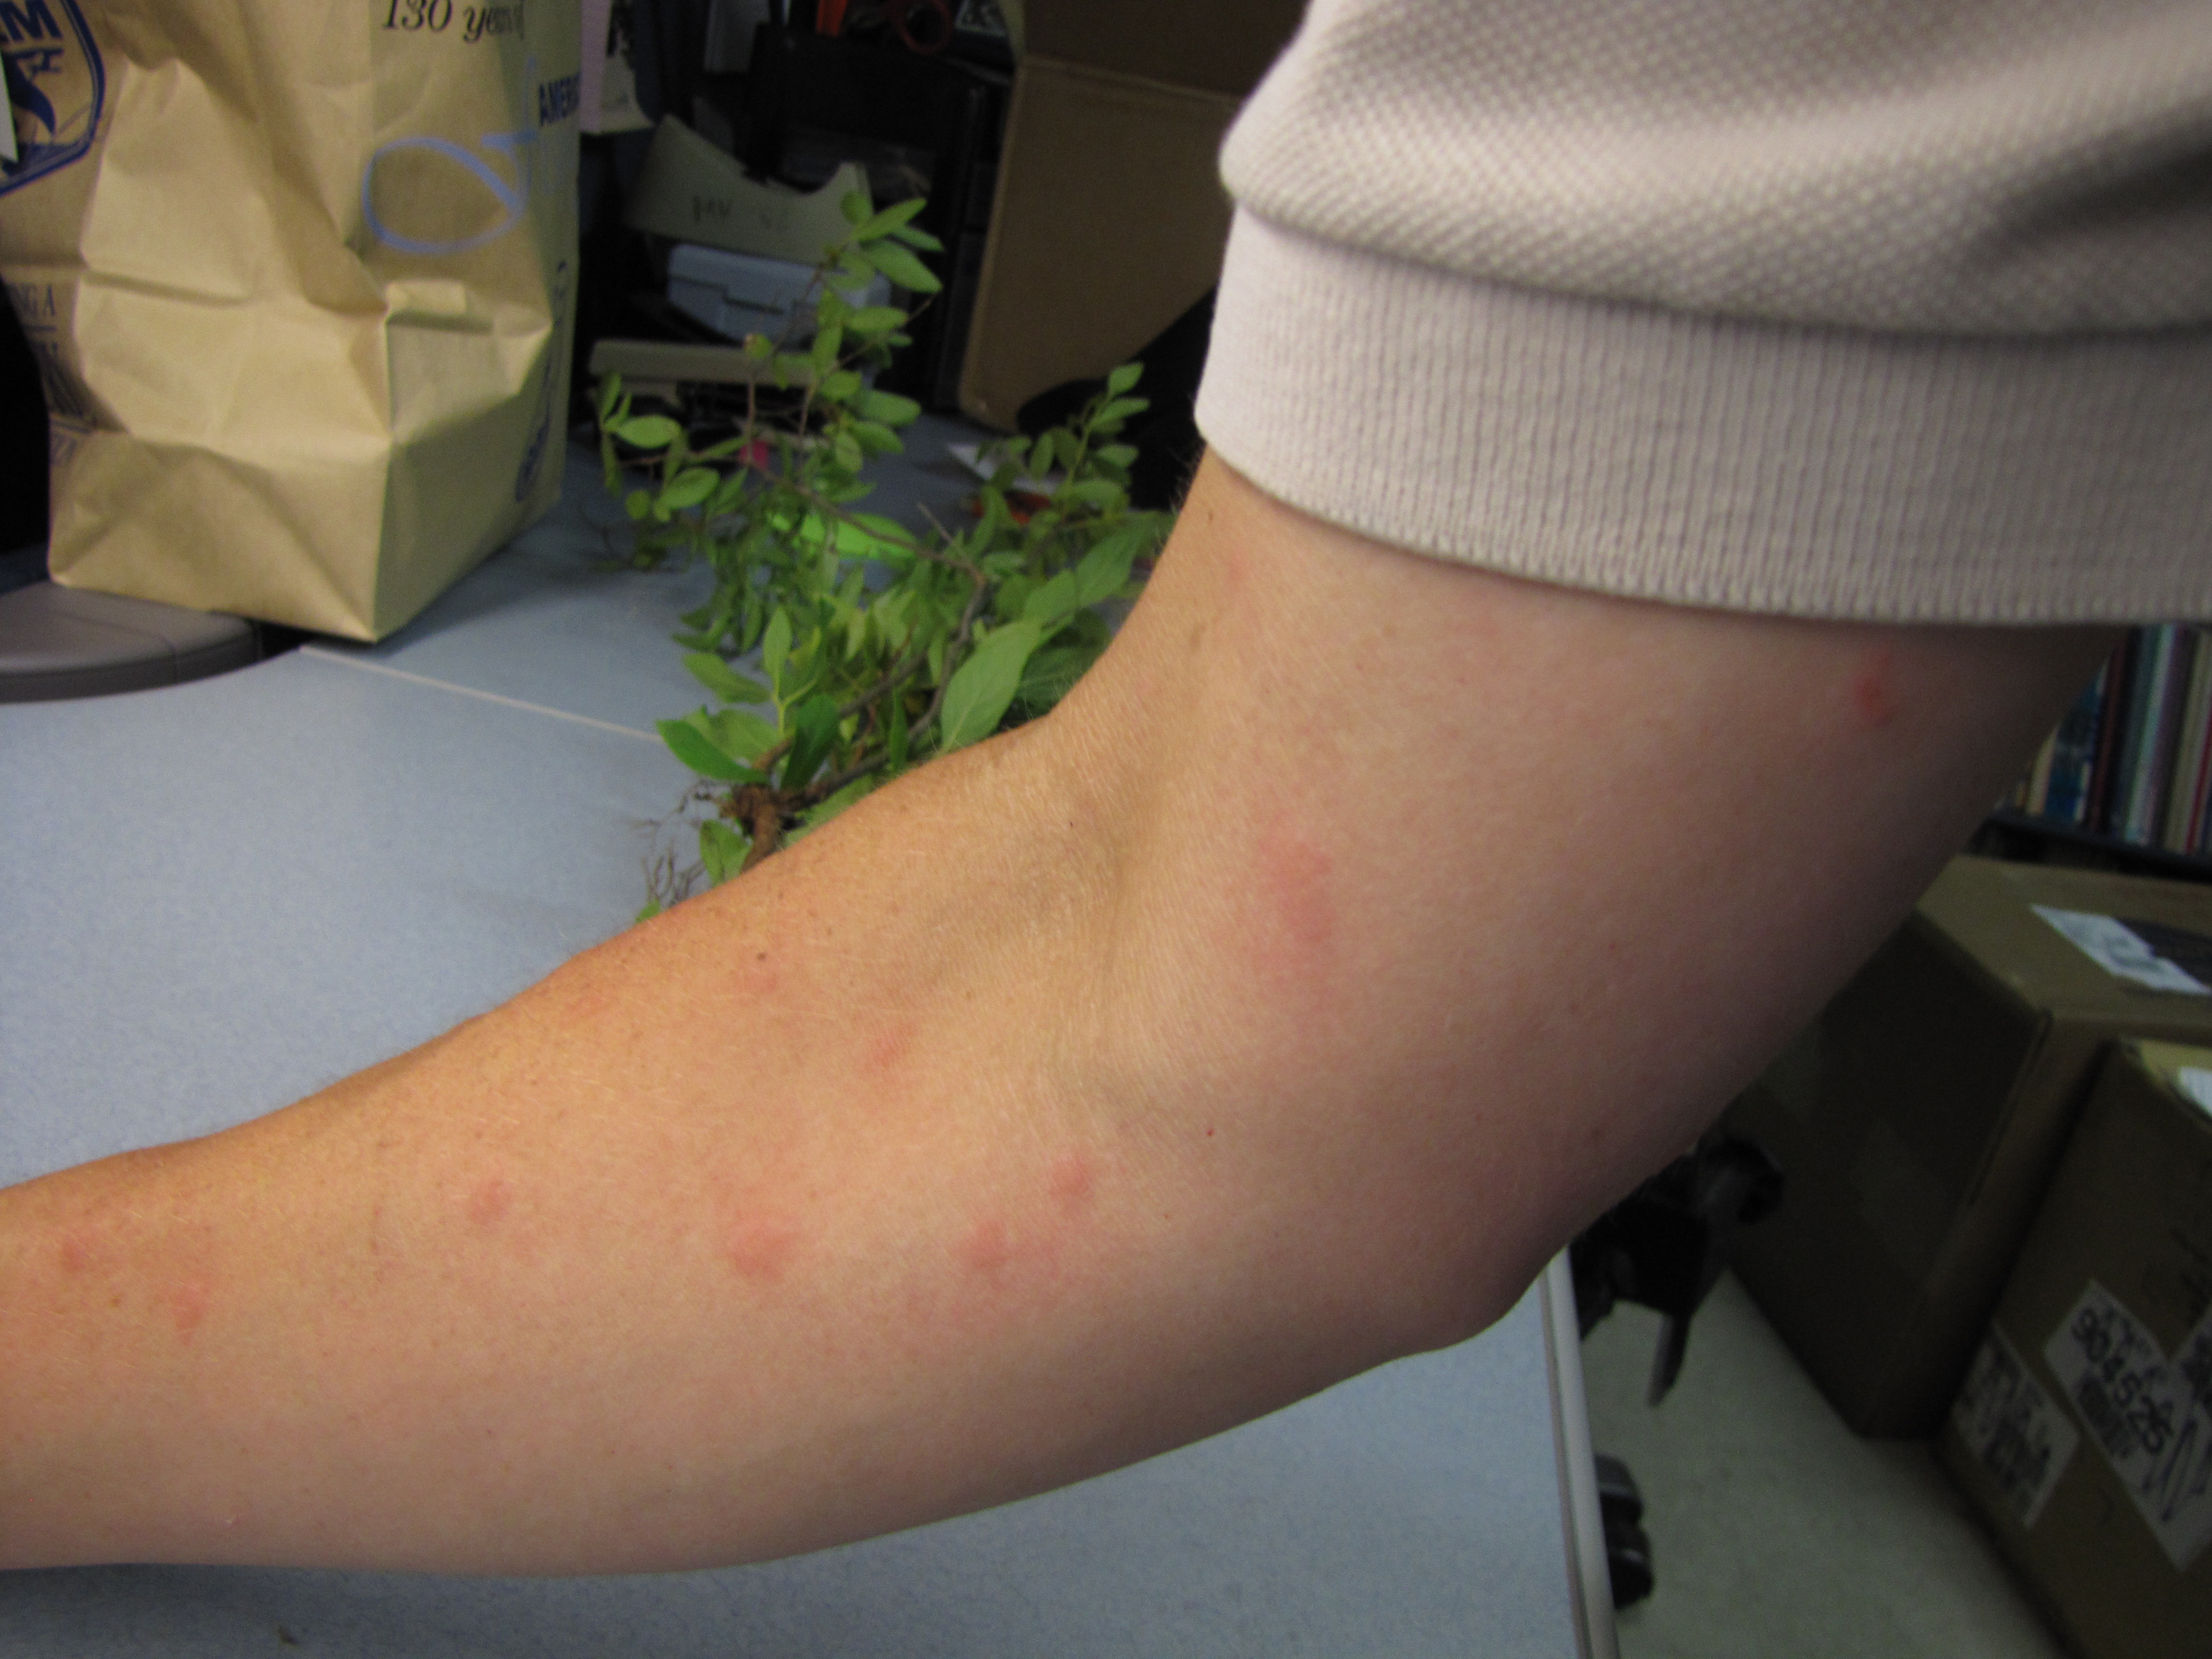 21 Common Red Spots on Universal Dermatology